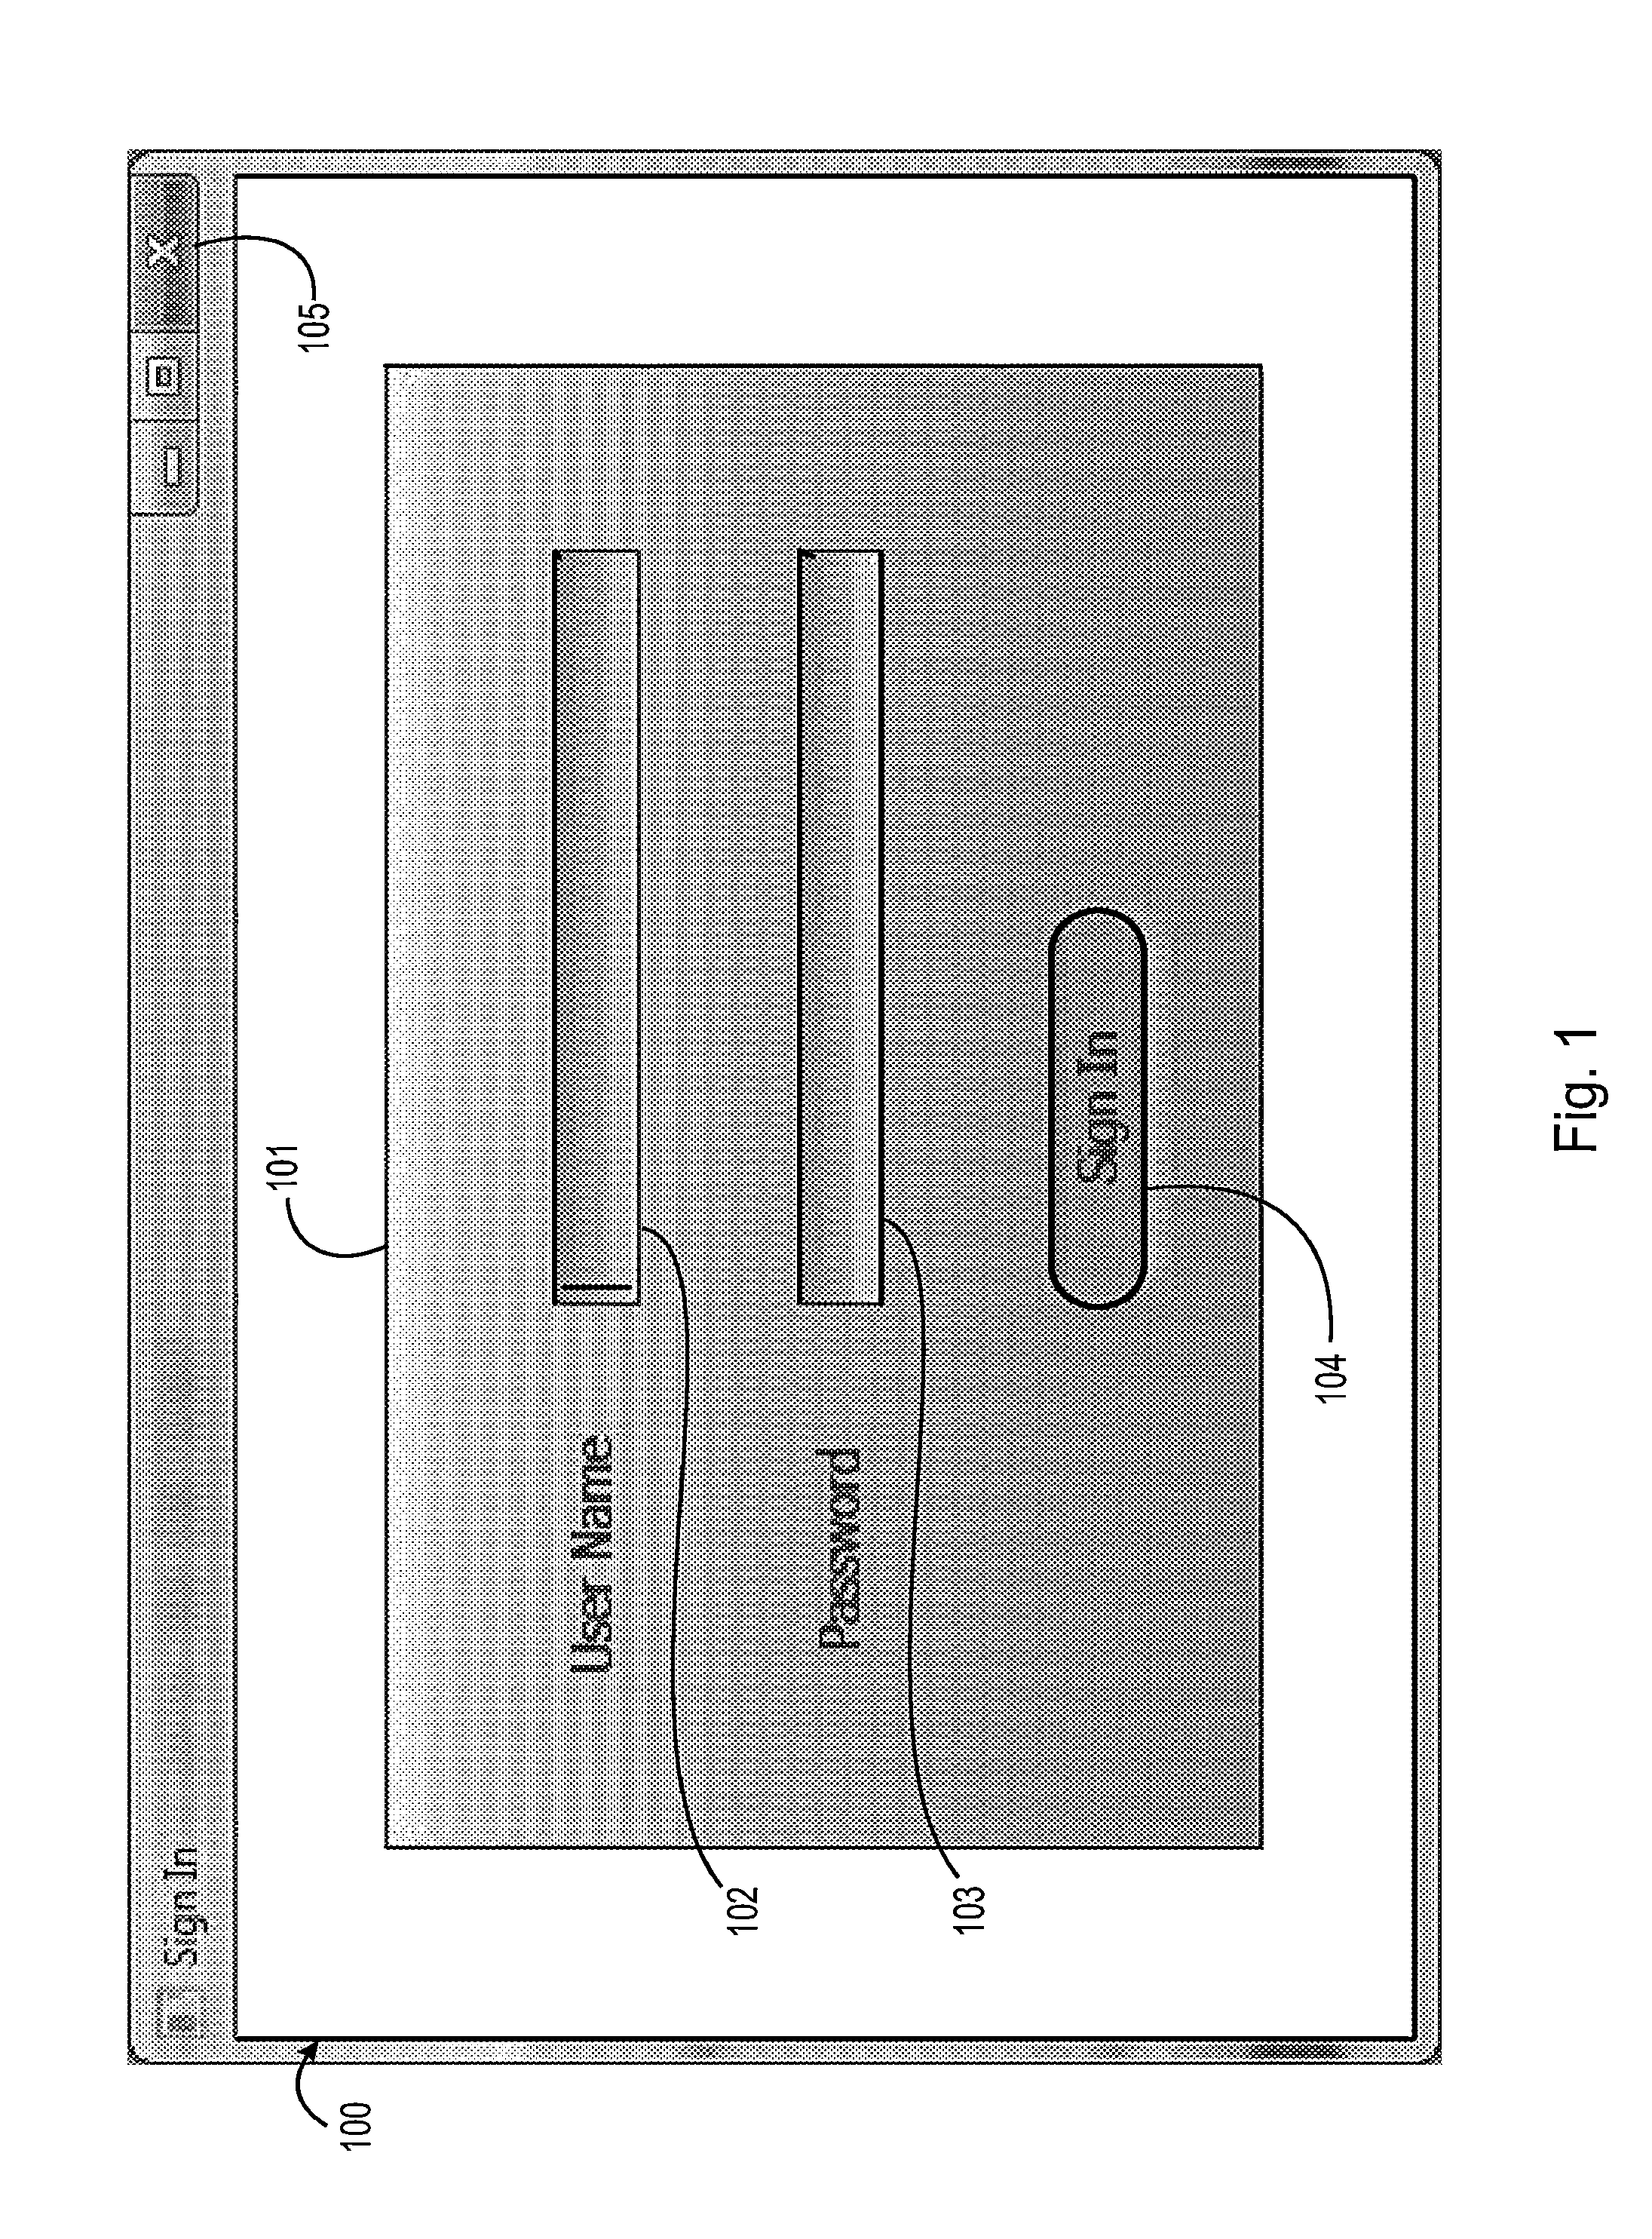 Method and Apparatus for Testing for Color Vision Loss